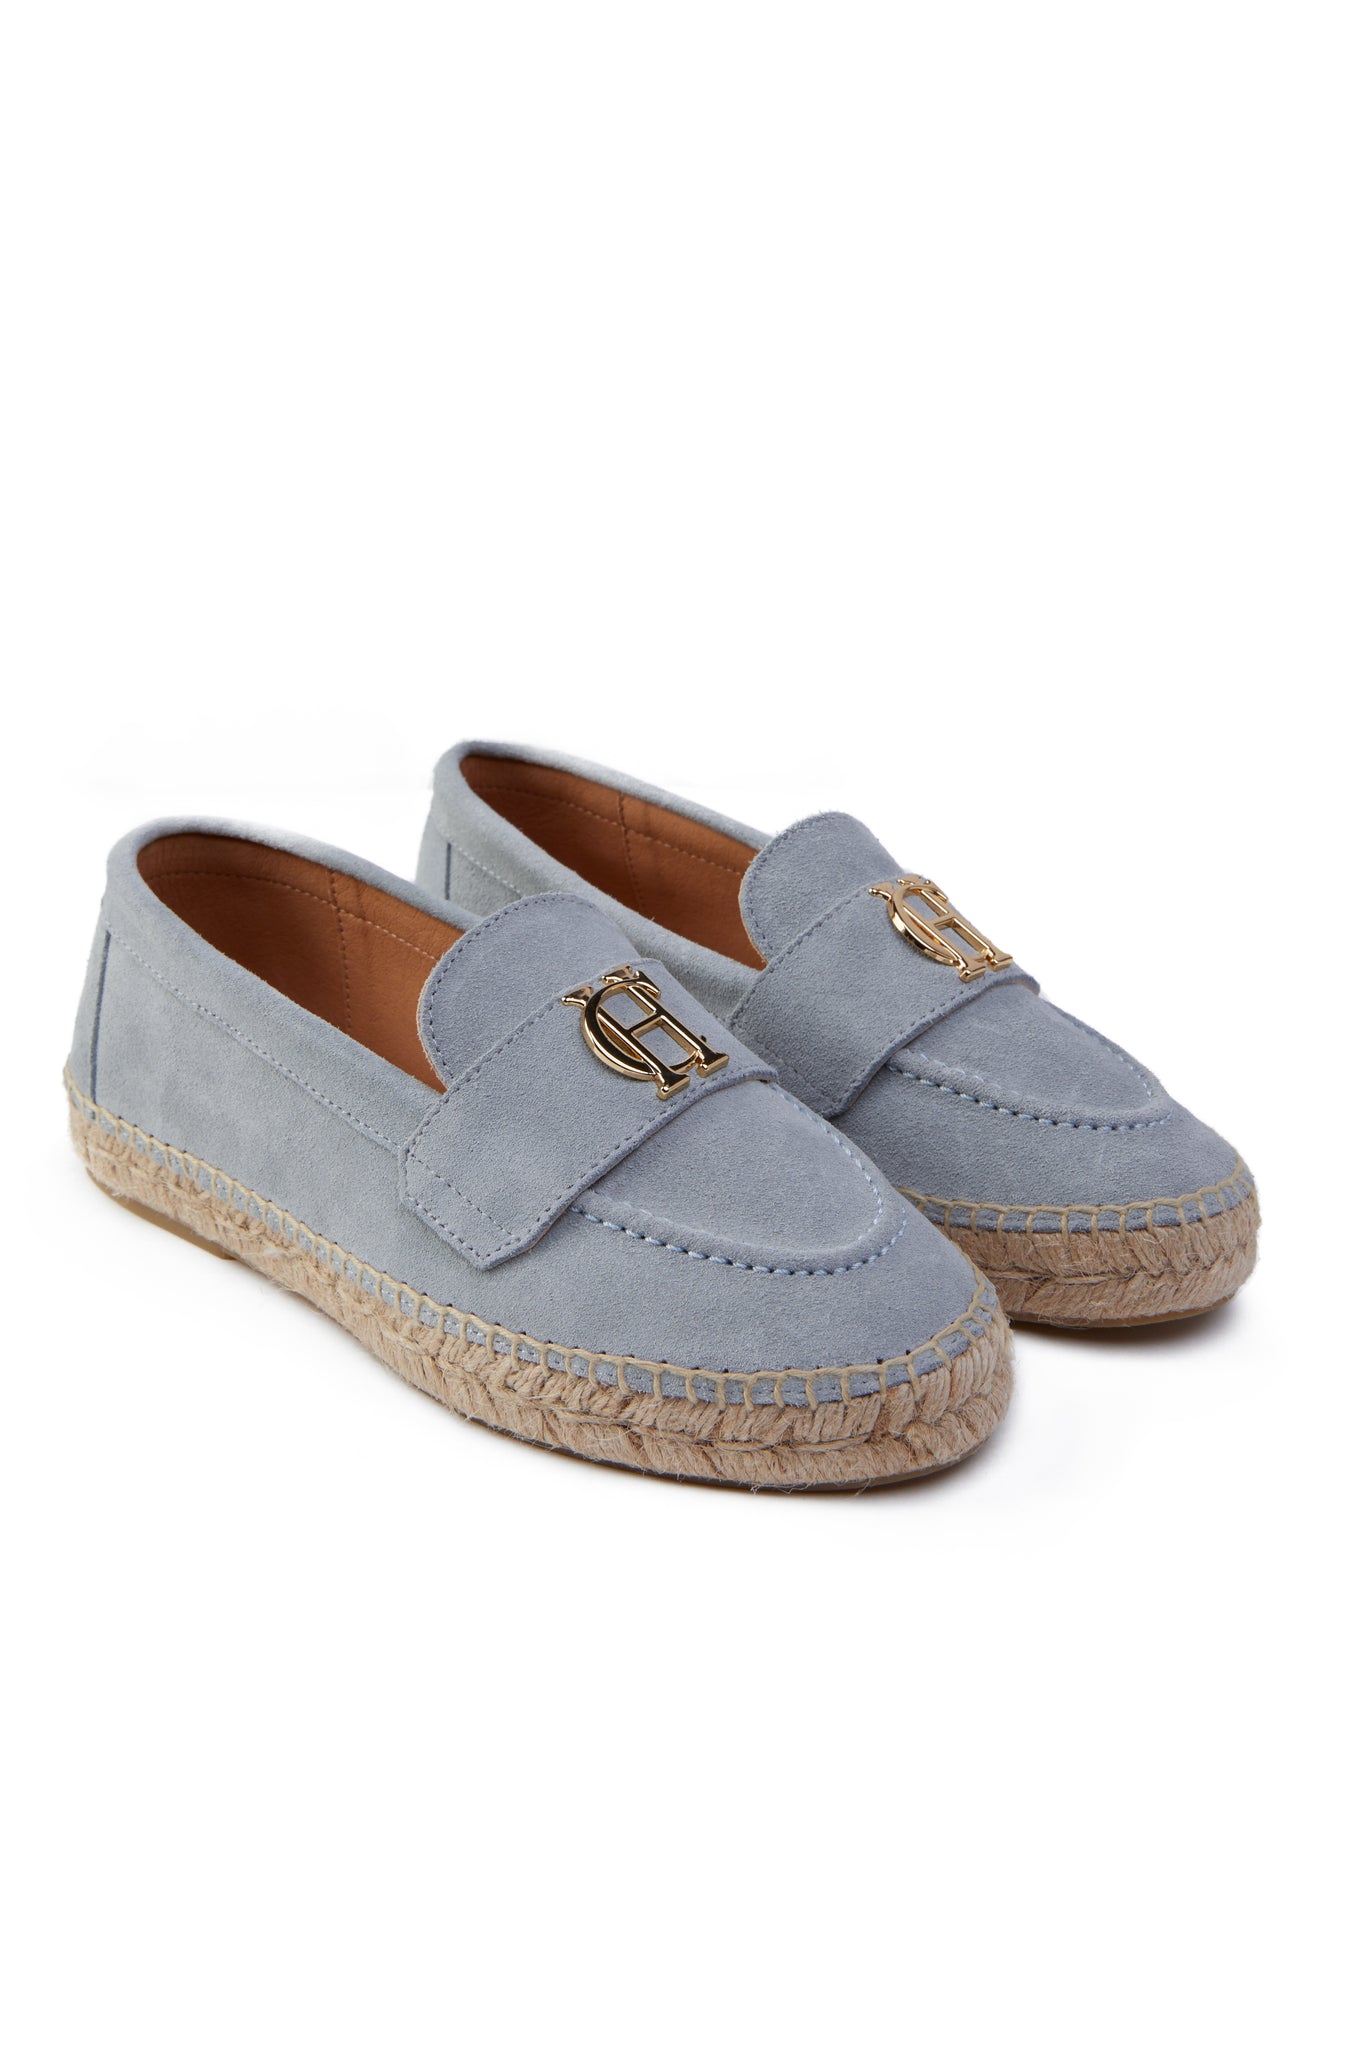 Light blue suede classic espadrille with plaited jute sole and gold hardware on top